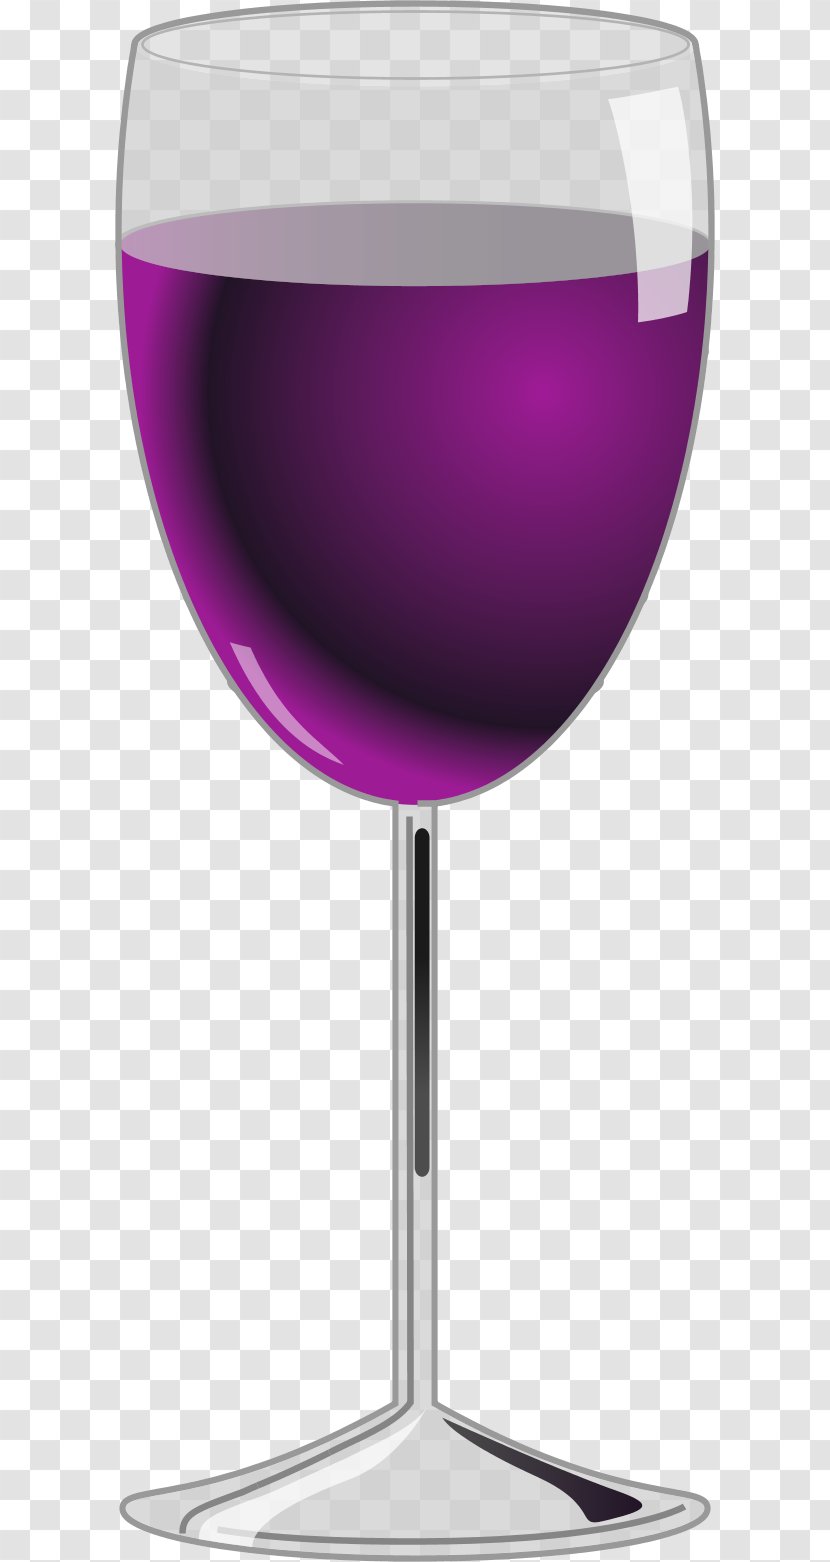 Red Wine Martini Glass - Bottle Transparent PNG